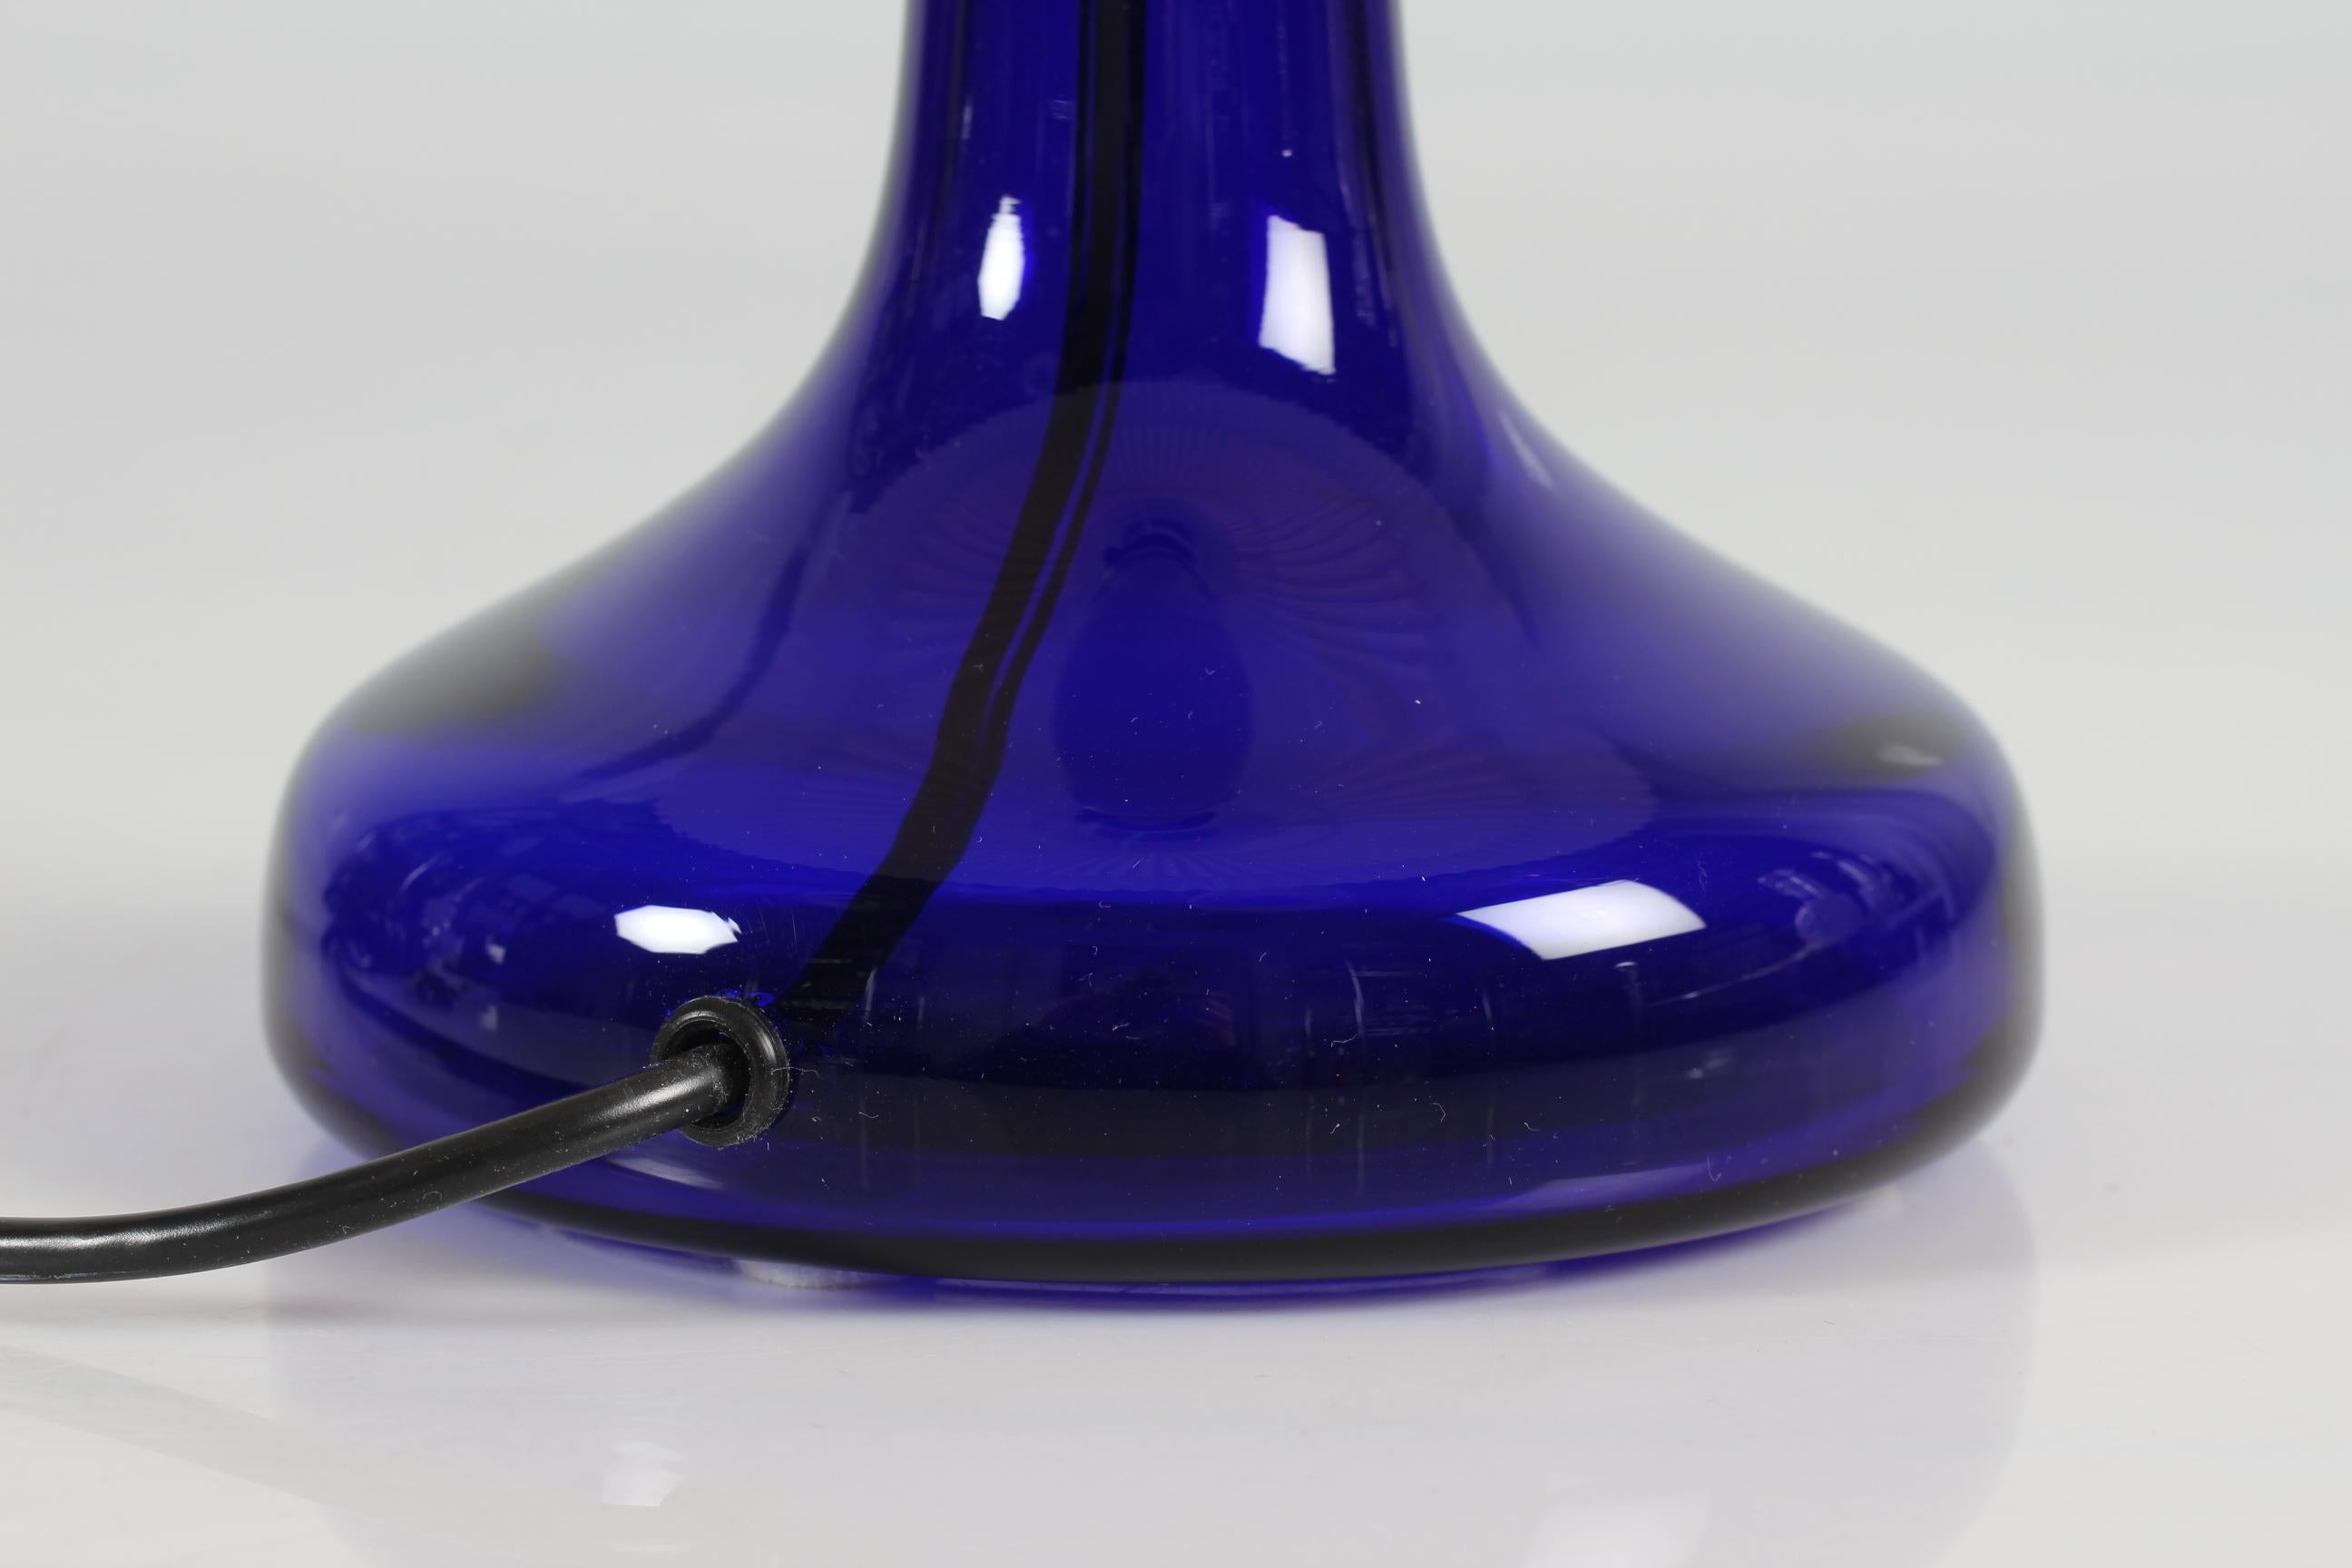 Danish table lamp model 343 by designer by Biilmann-Petersen 
The lamp foot is made of mouth blown translucent dark blue glass from Holmegaard glass works and comes with a vintage original Le Klint lamp shade.

Measurements:
Height including